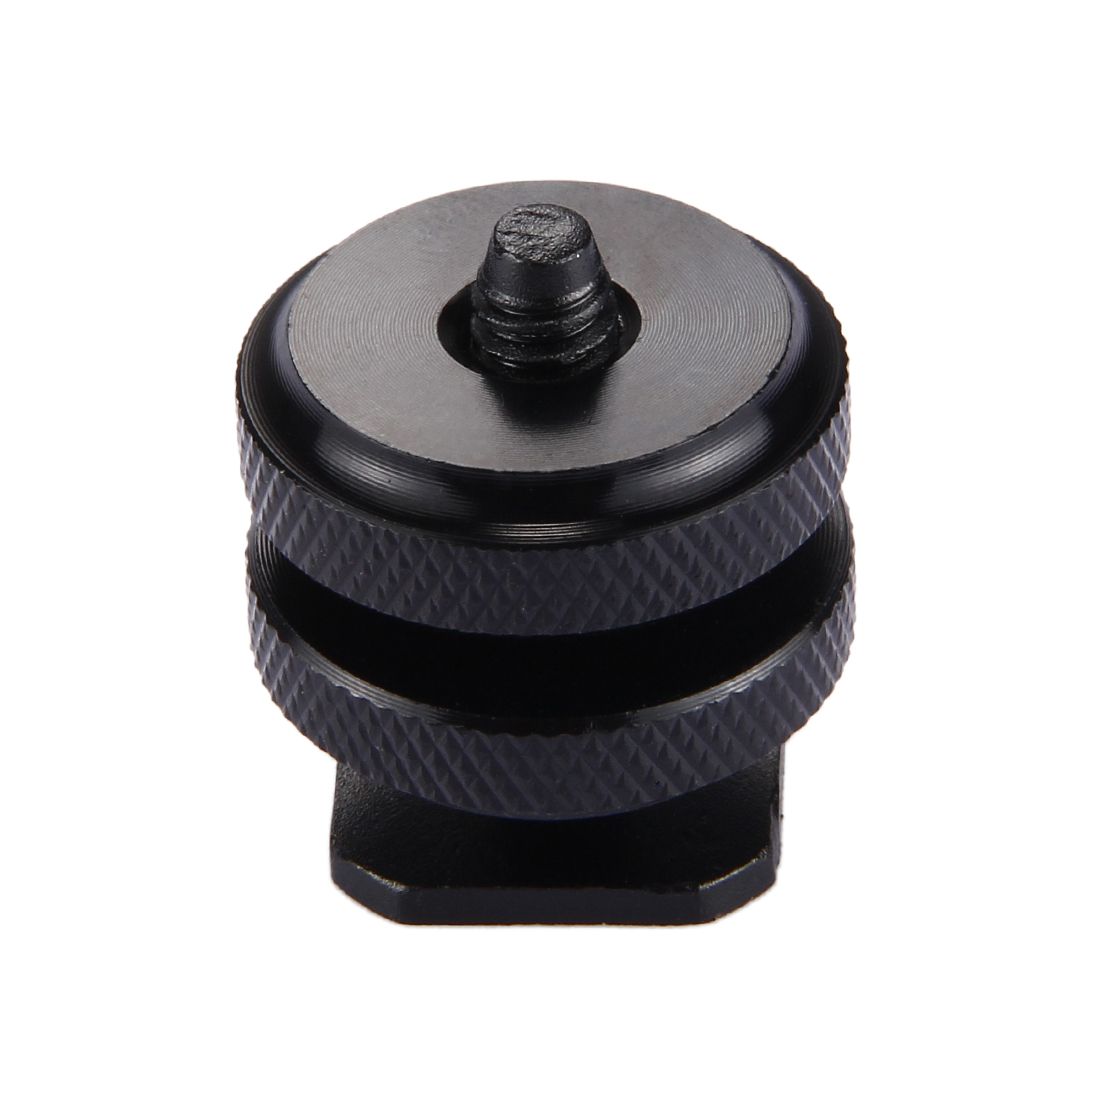 PULUZ-PU210-Reinforced-Hot-Shoe-Screw-Adapter-with-Double-Nut-for-DSLR-Cameras-GoPro-HERO5-4-3-2-1-1253595